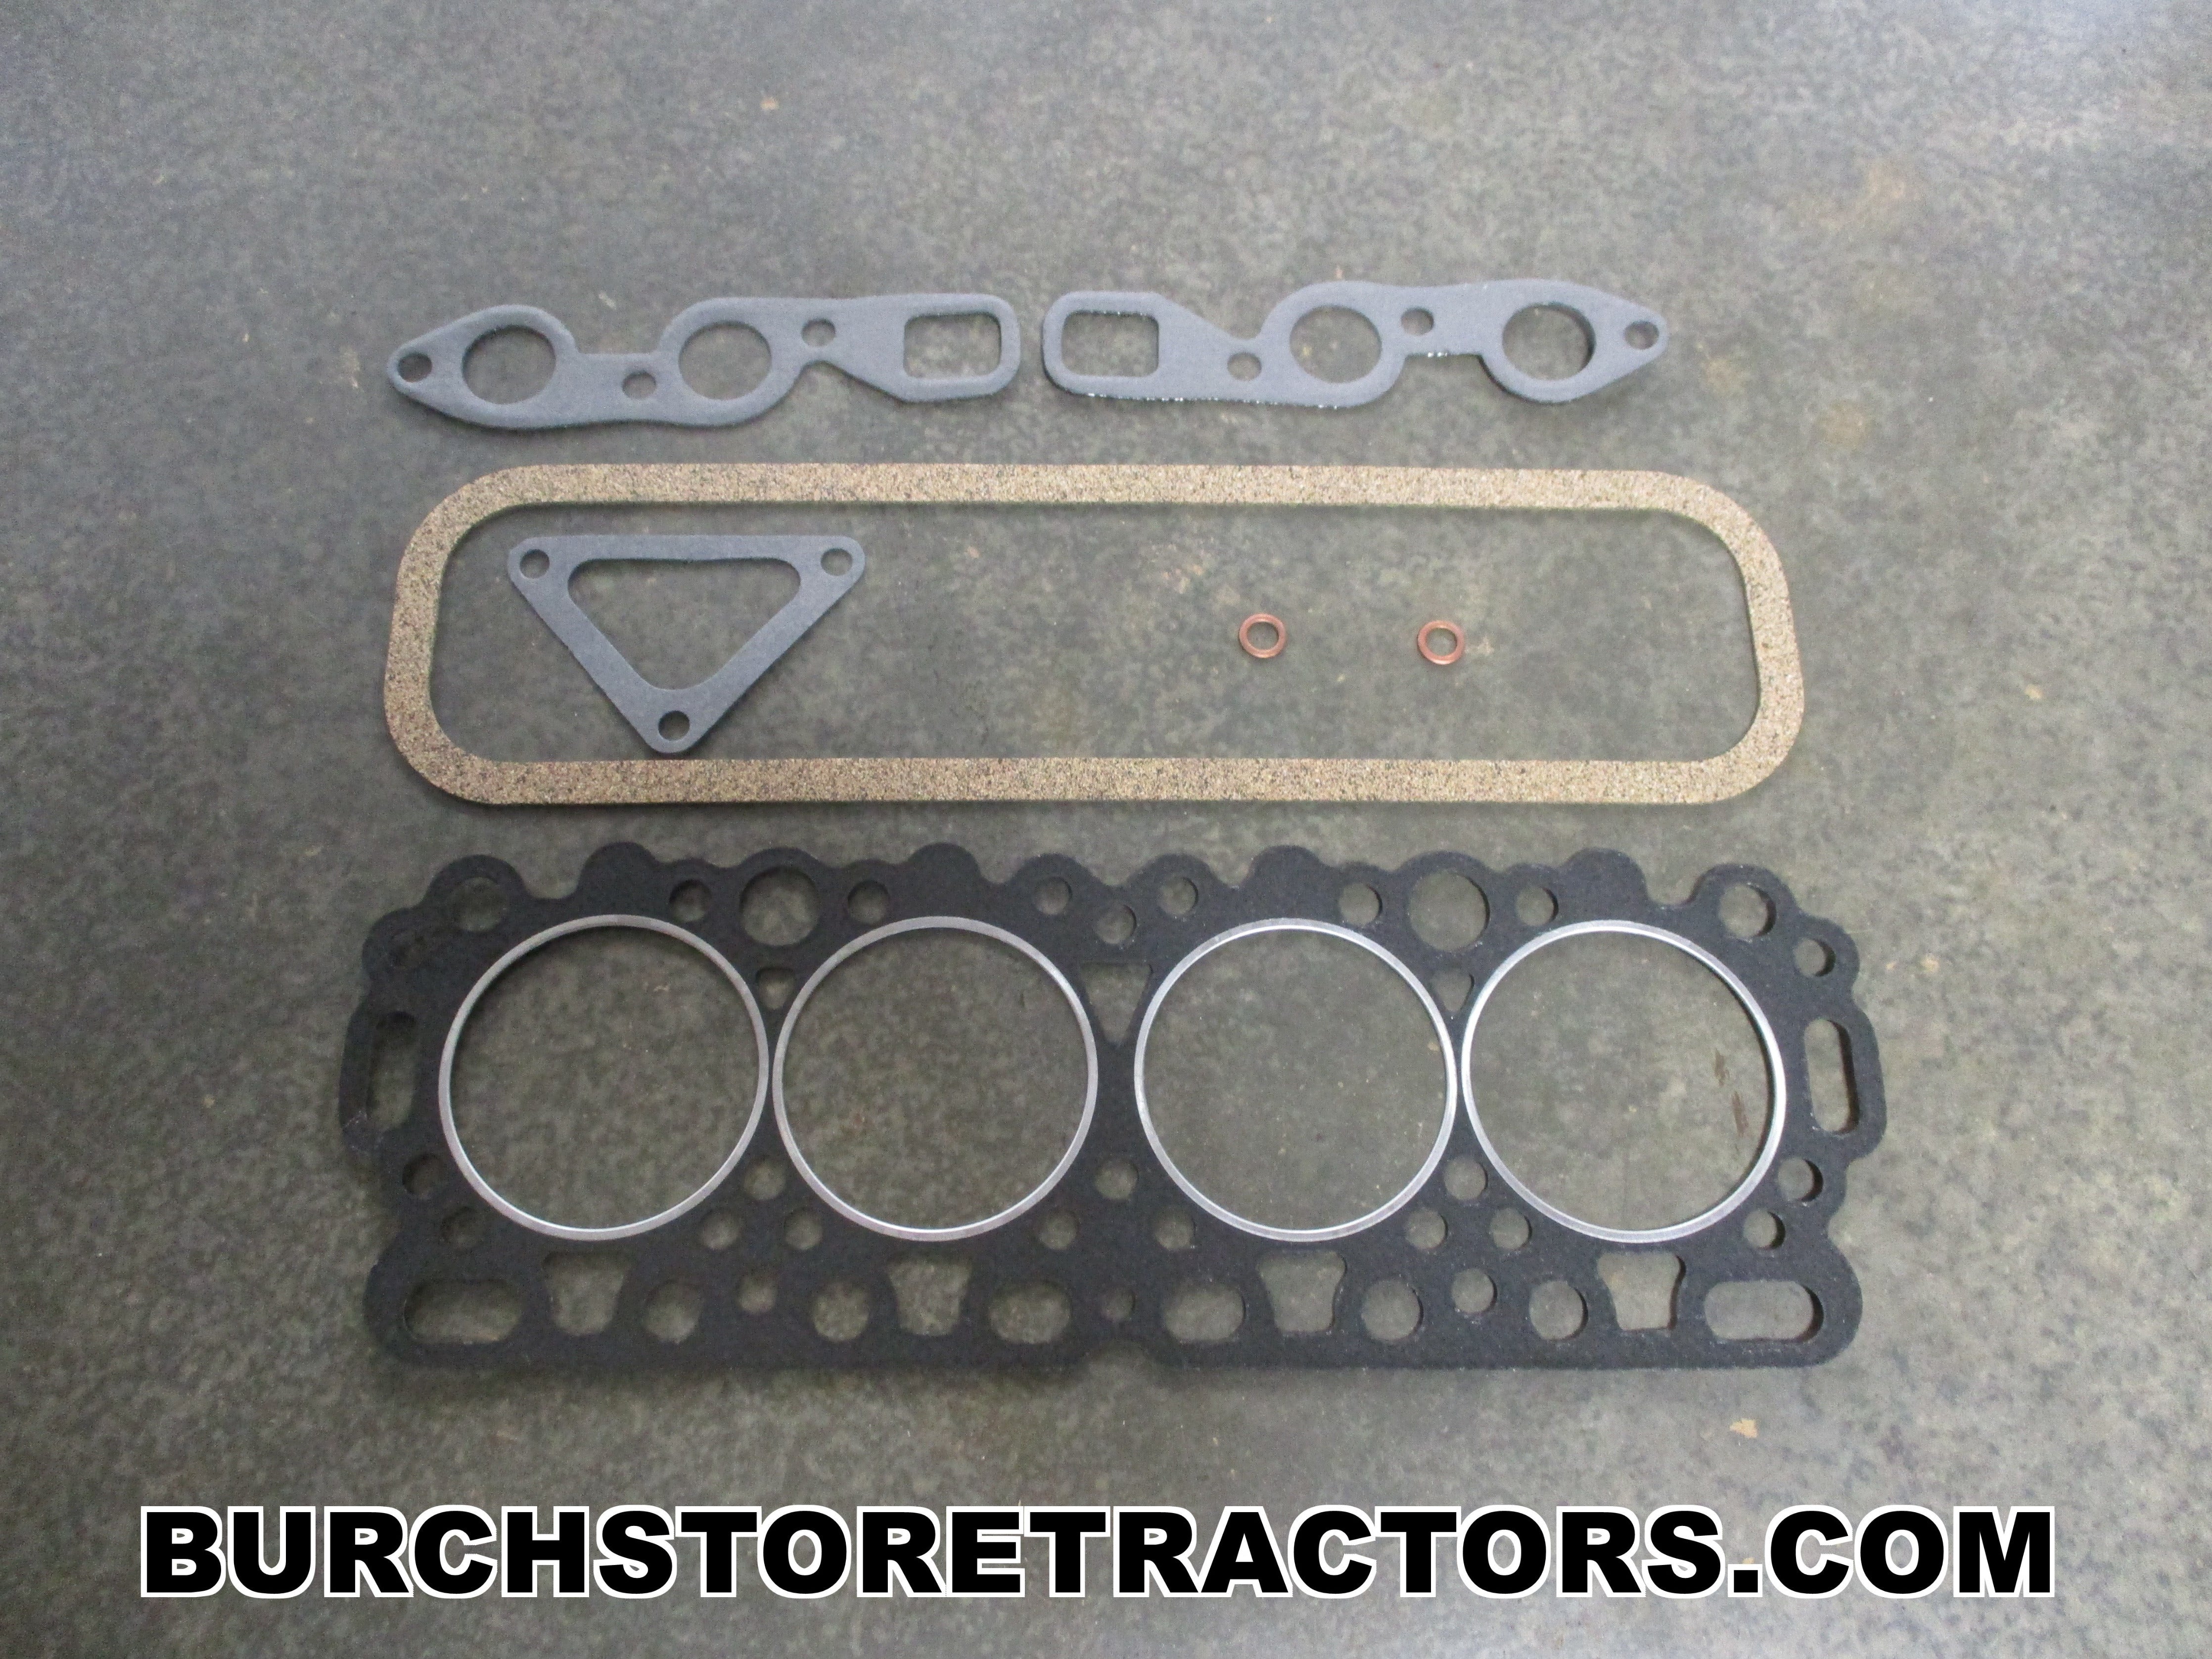 New Complete Head Gasket Kit for International T340, 404, 424, 444, 50 –  Burch Store Tractors